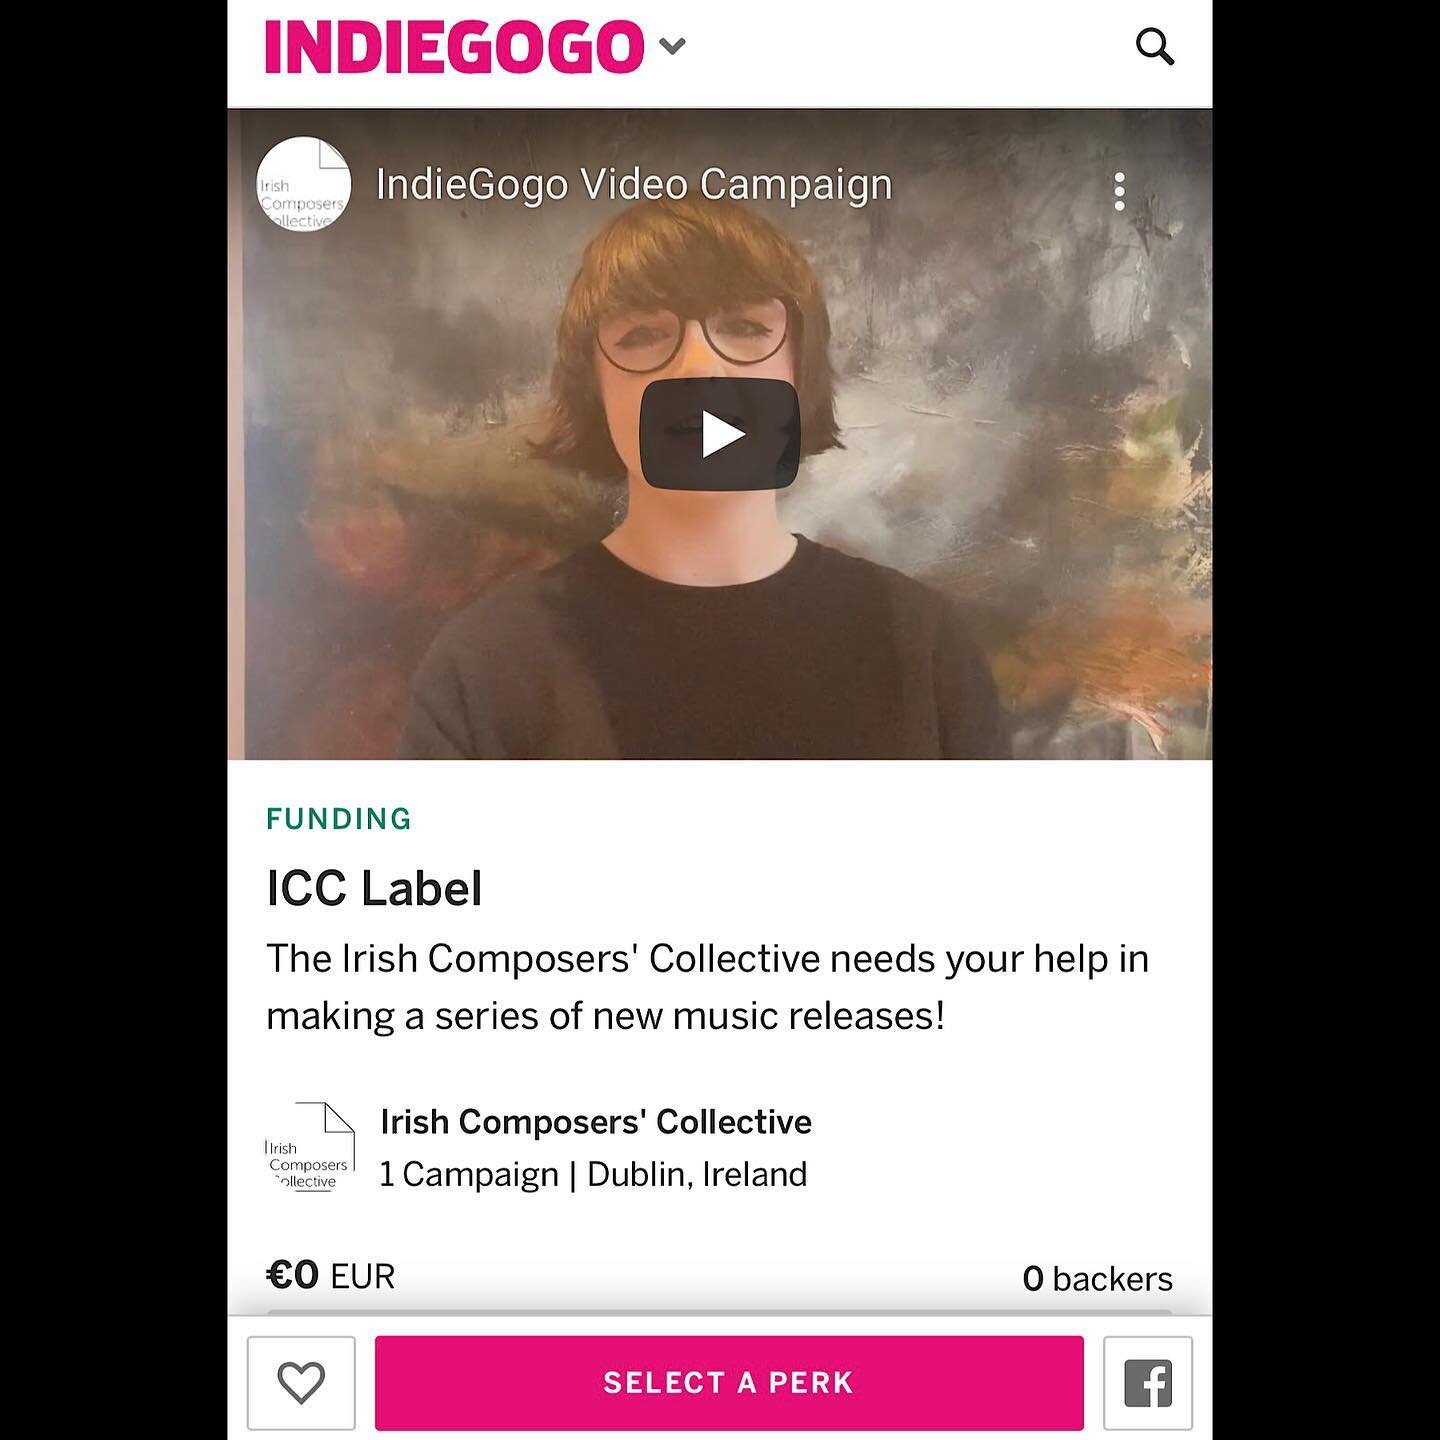 We've lit the fuse, now you can help us make 2021 go off with a bang!

The Irish Composers' Collective is happy to announce the launch of our Indiegogo fundraising campaign to create our own record label.

We have some great perks available for each 